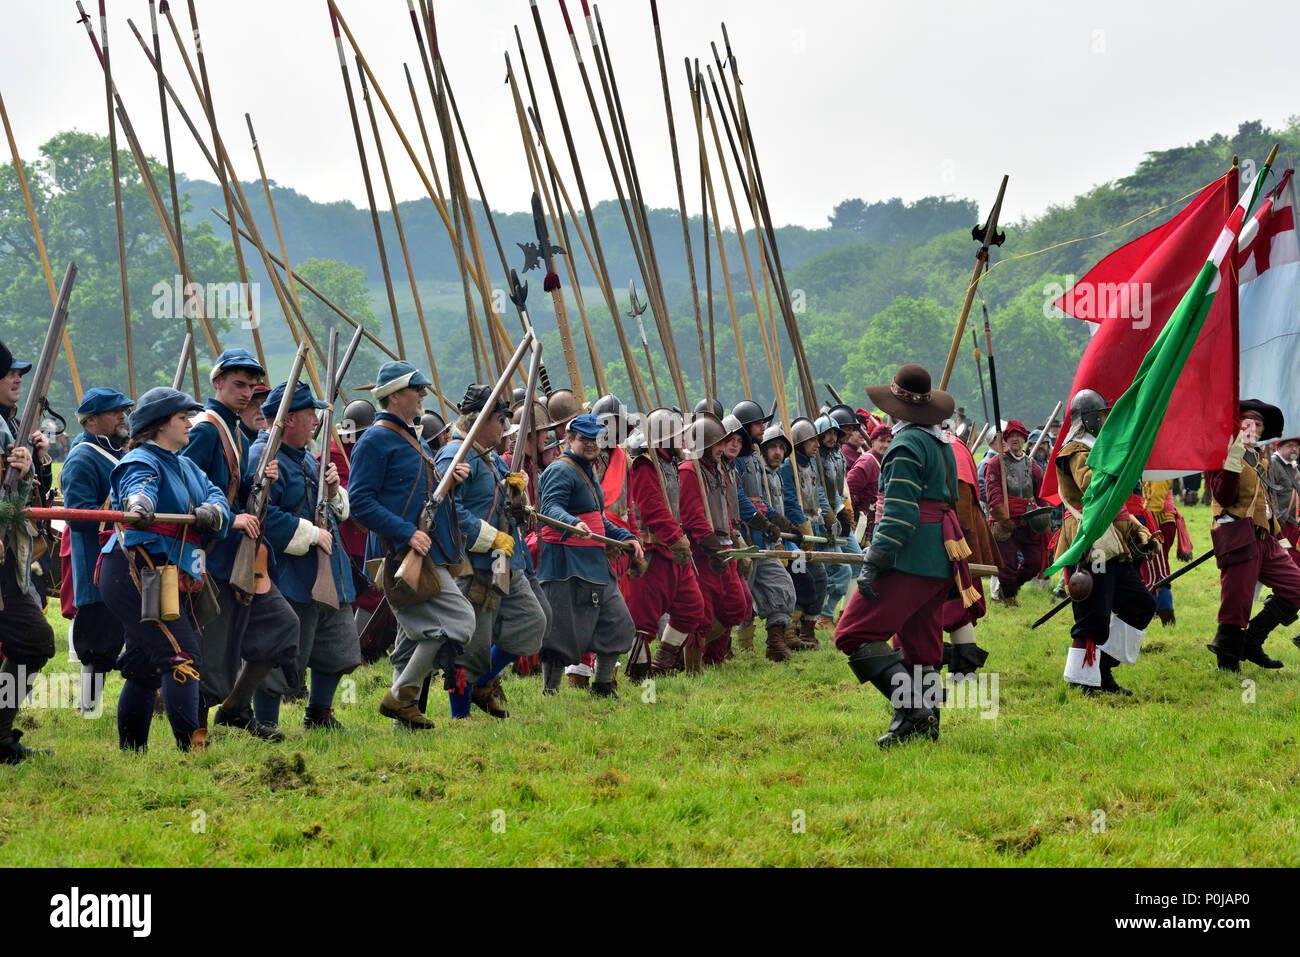 Musketeers and pikemen in 17th century military re-enactment of English Civil war battle, UK Stock Photo